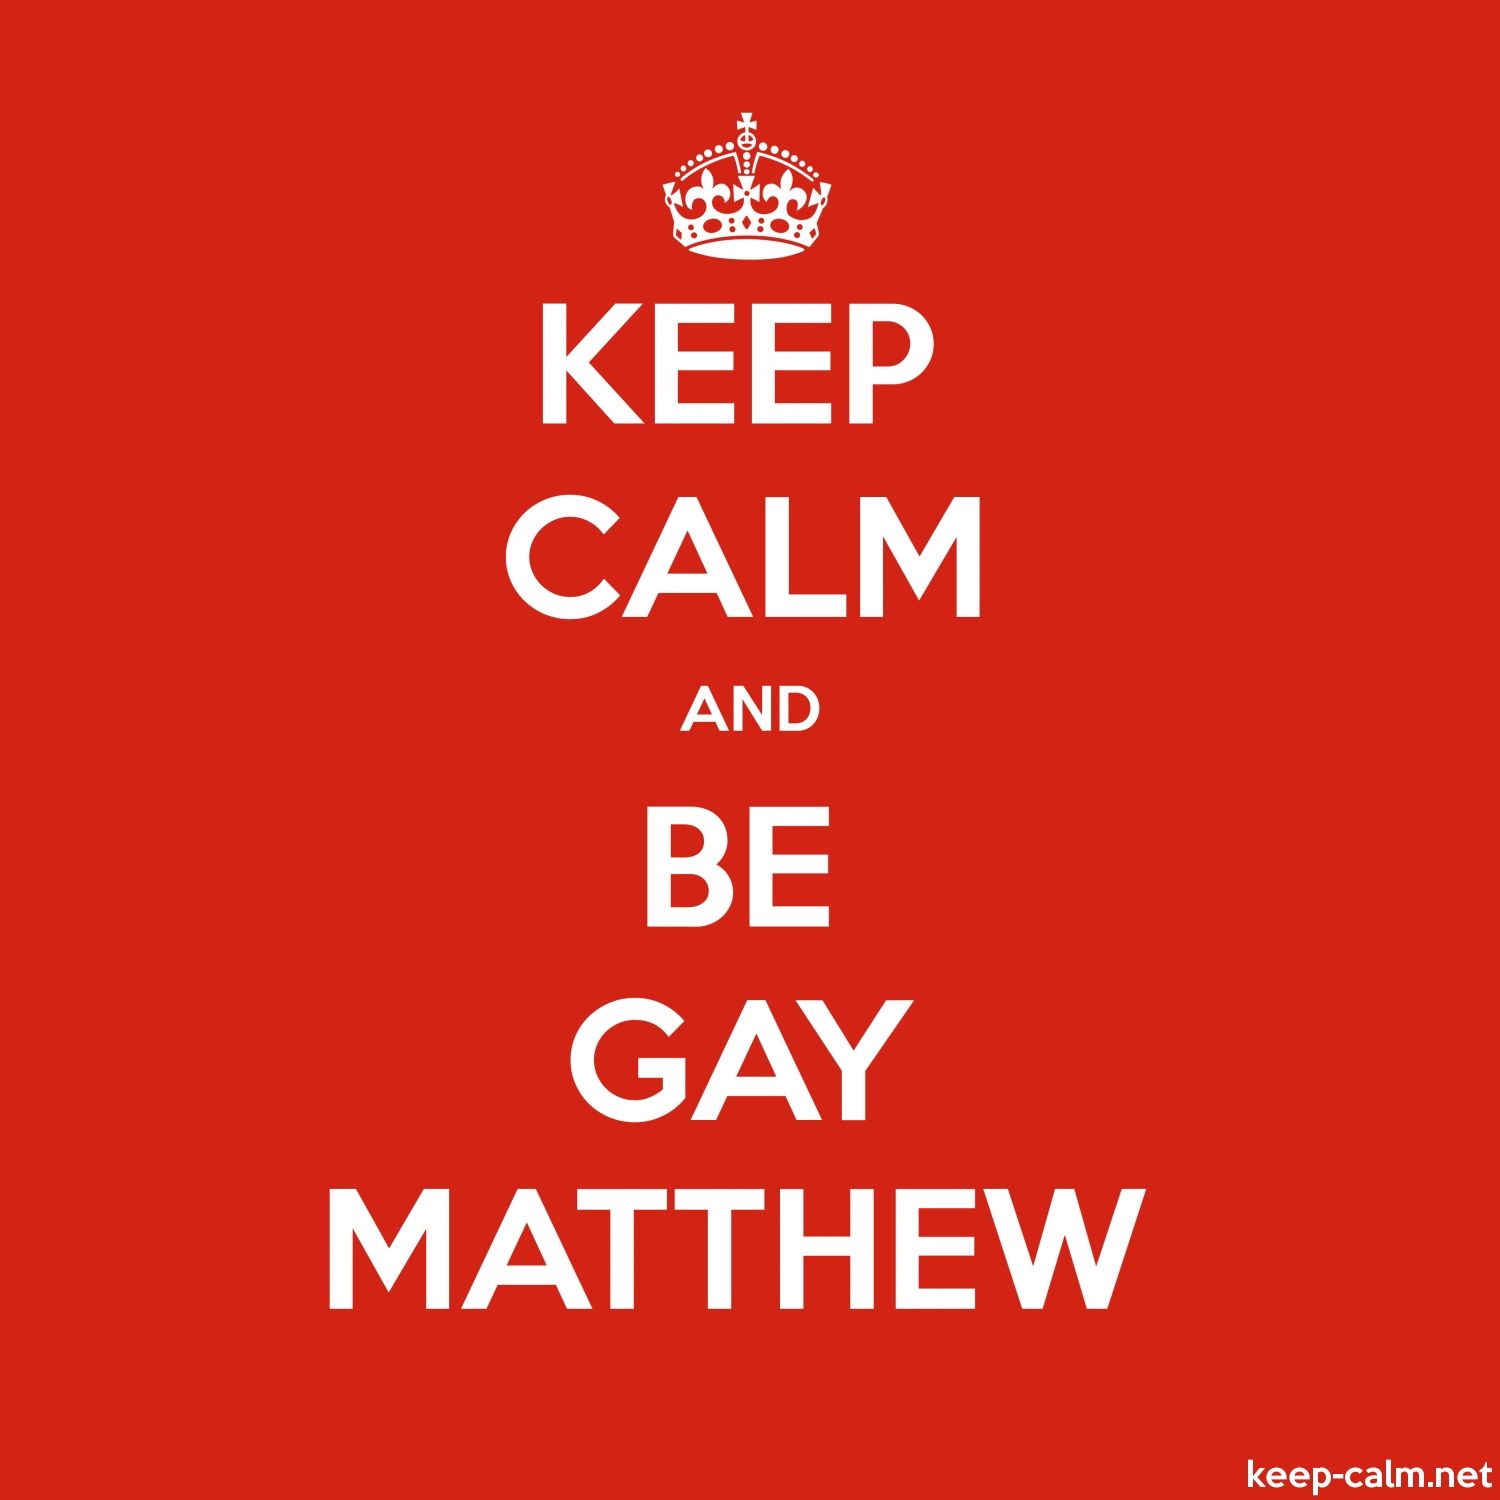 KEEP CALM AND BE GAY MATTHEW